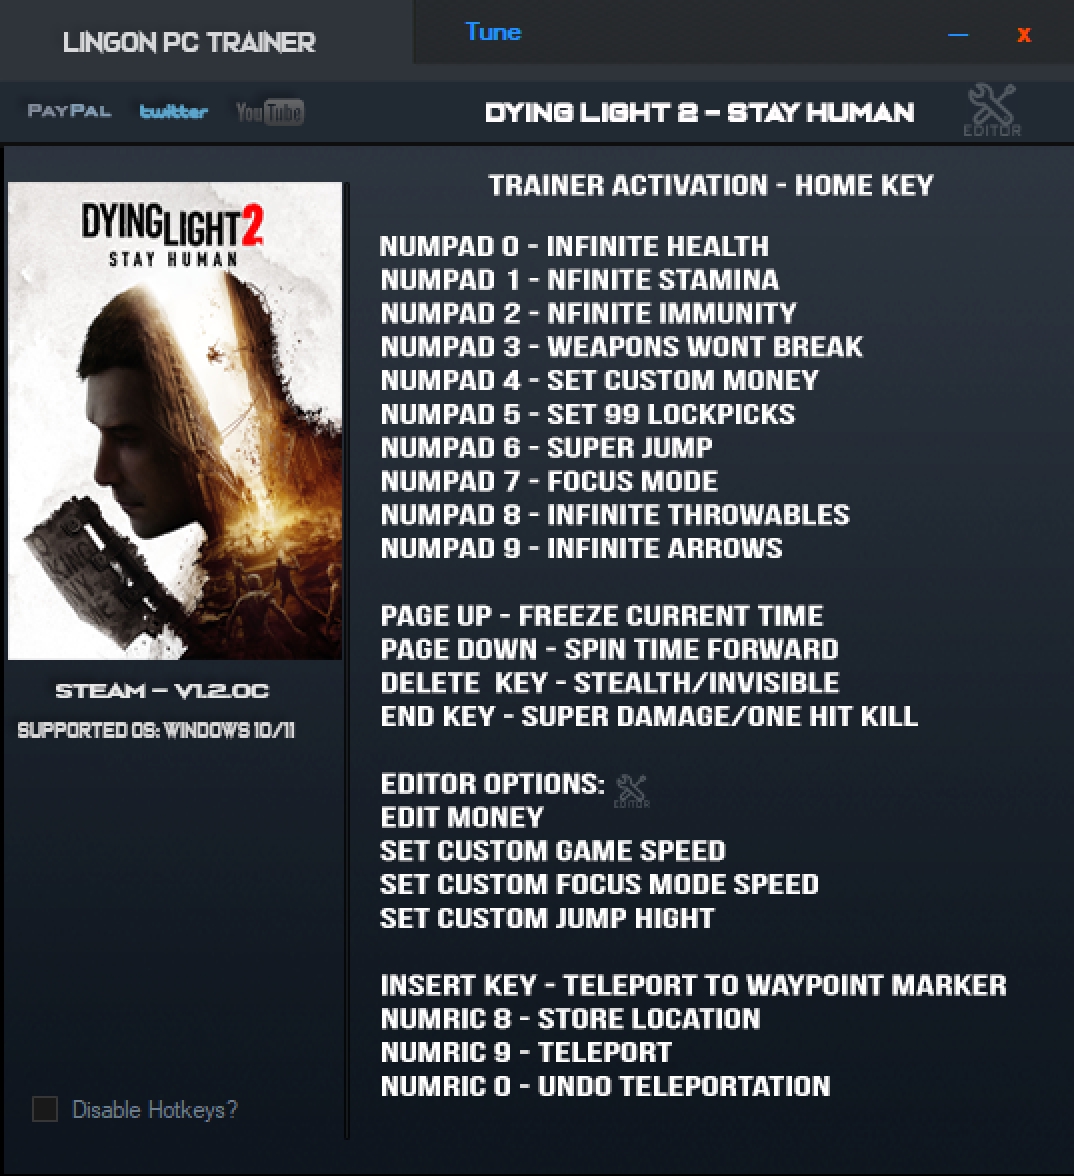 Steam client application is required in order to play dying light 2 фото 111